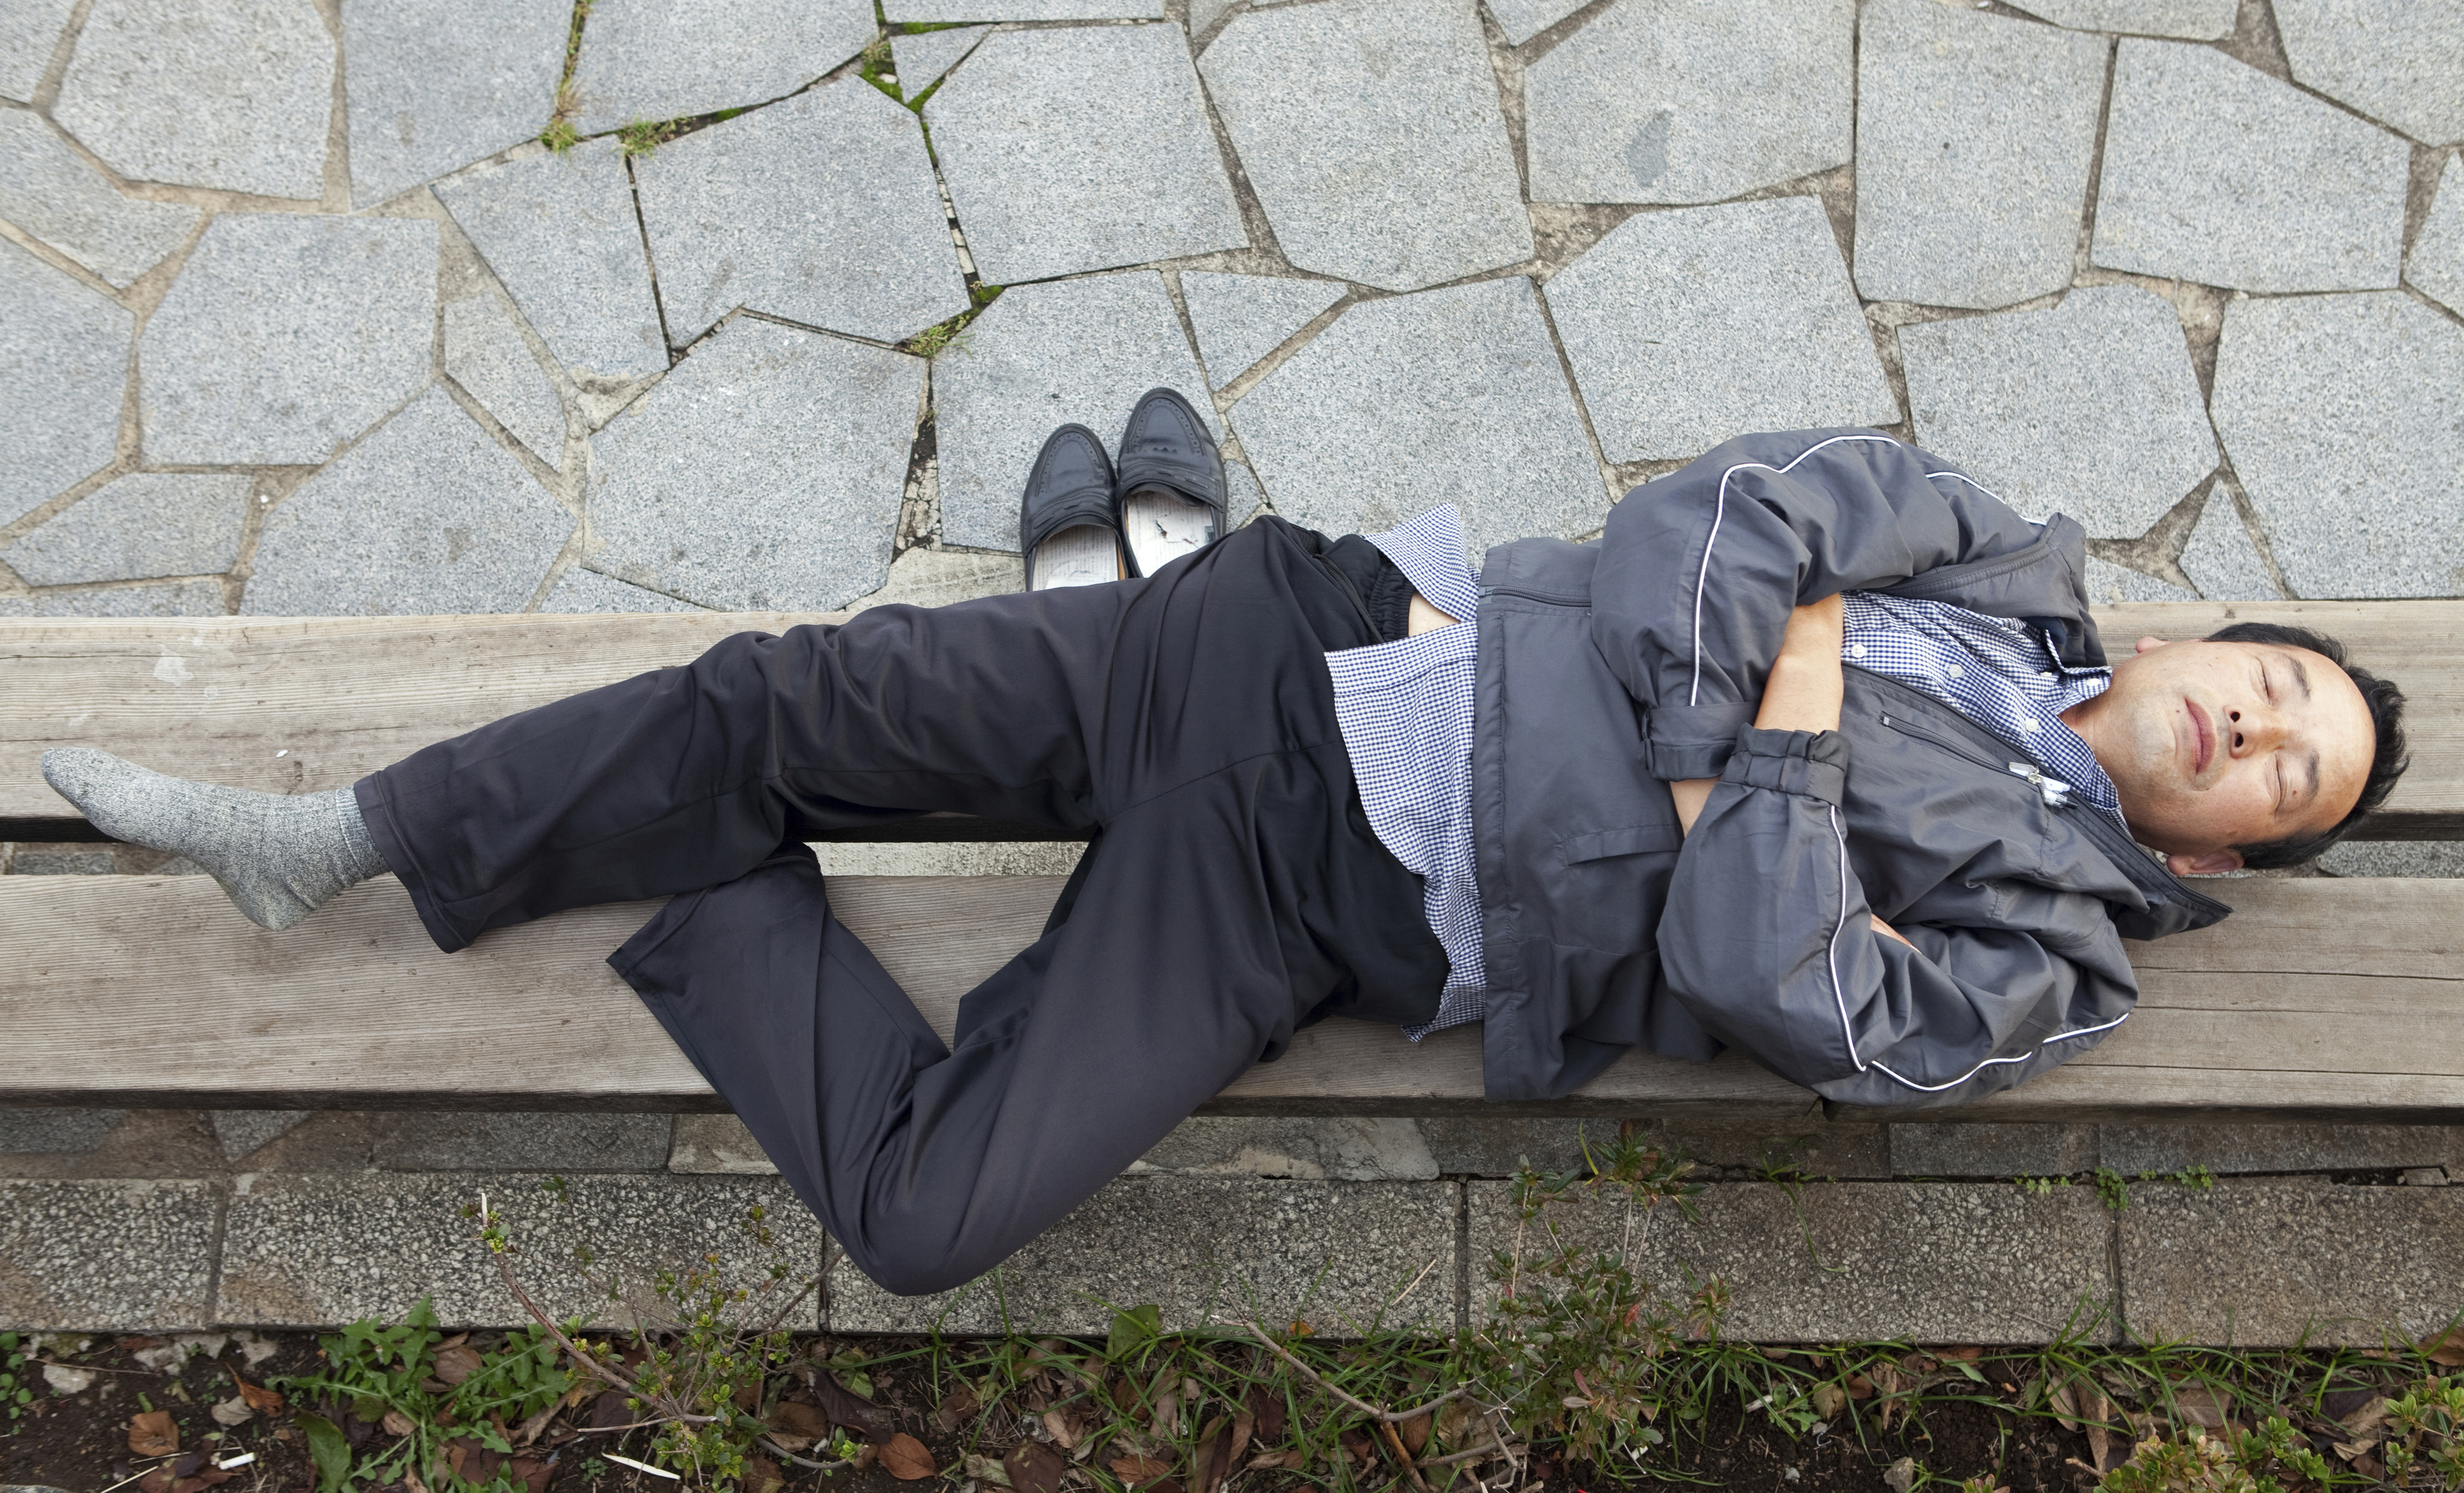 A man sleeps on a bench in Tokyo in November 2010. | ISTOCK